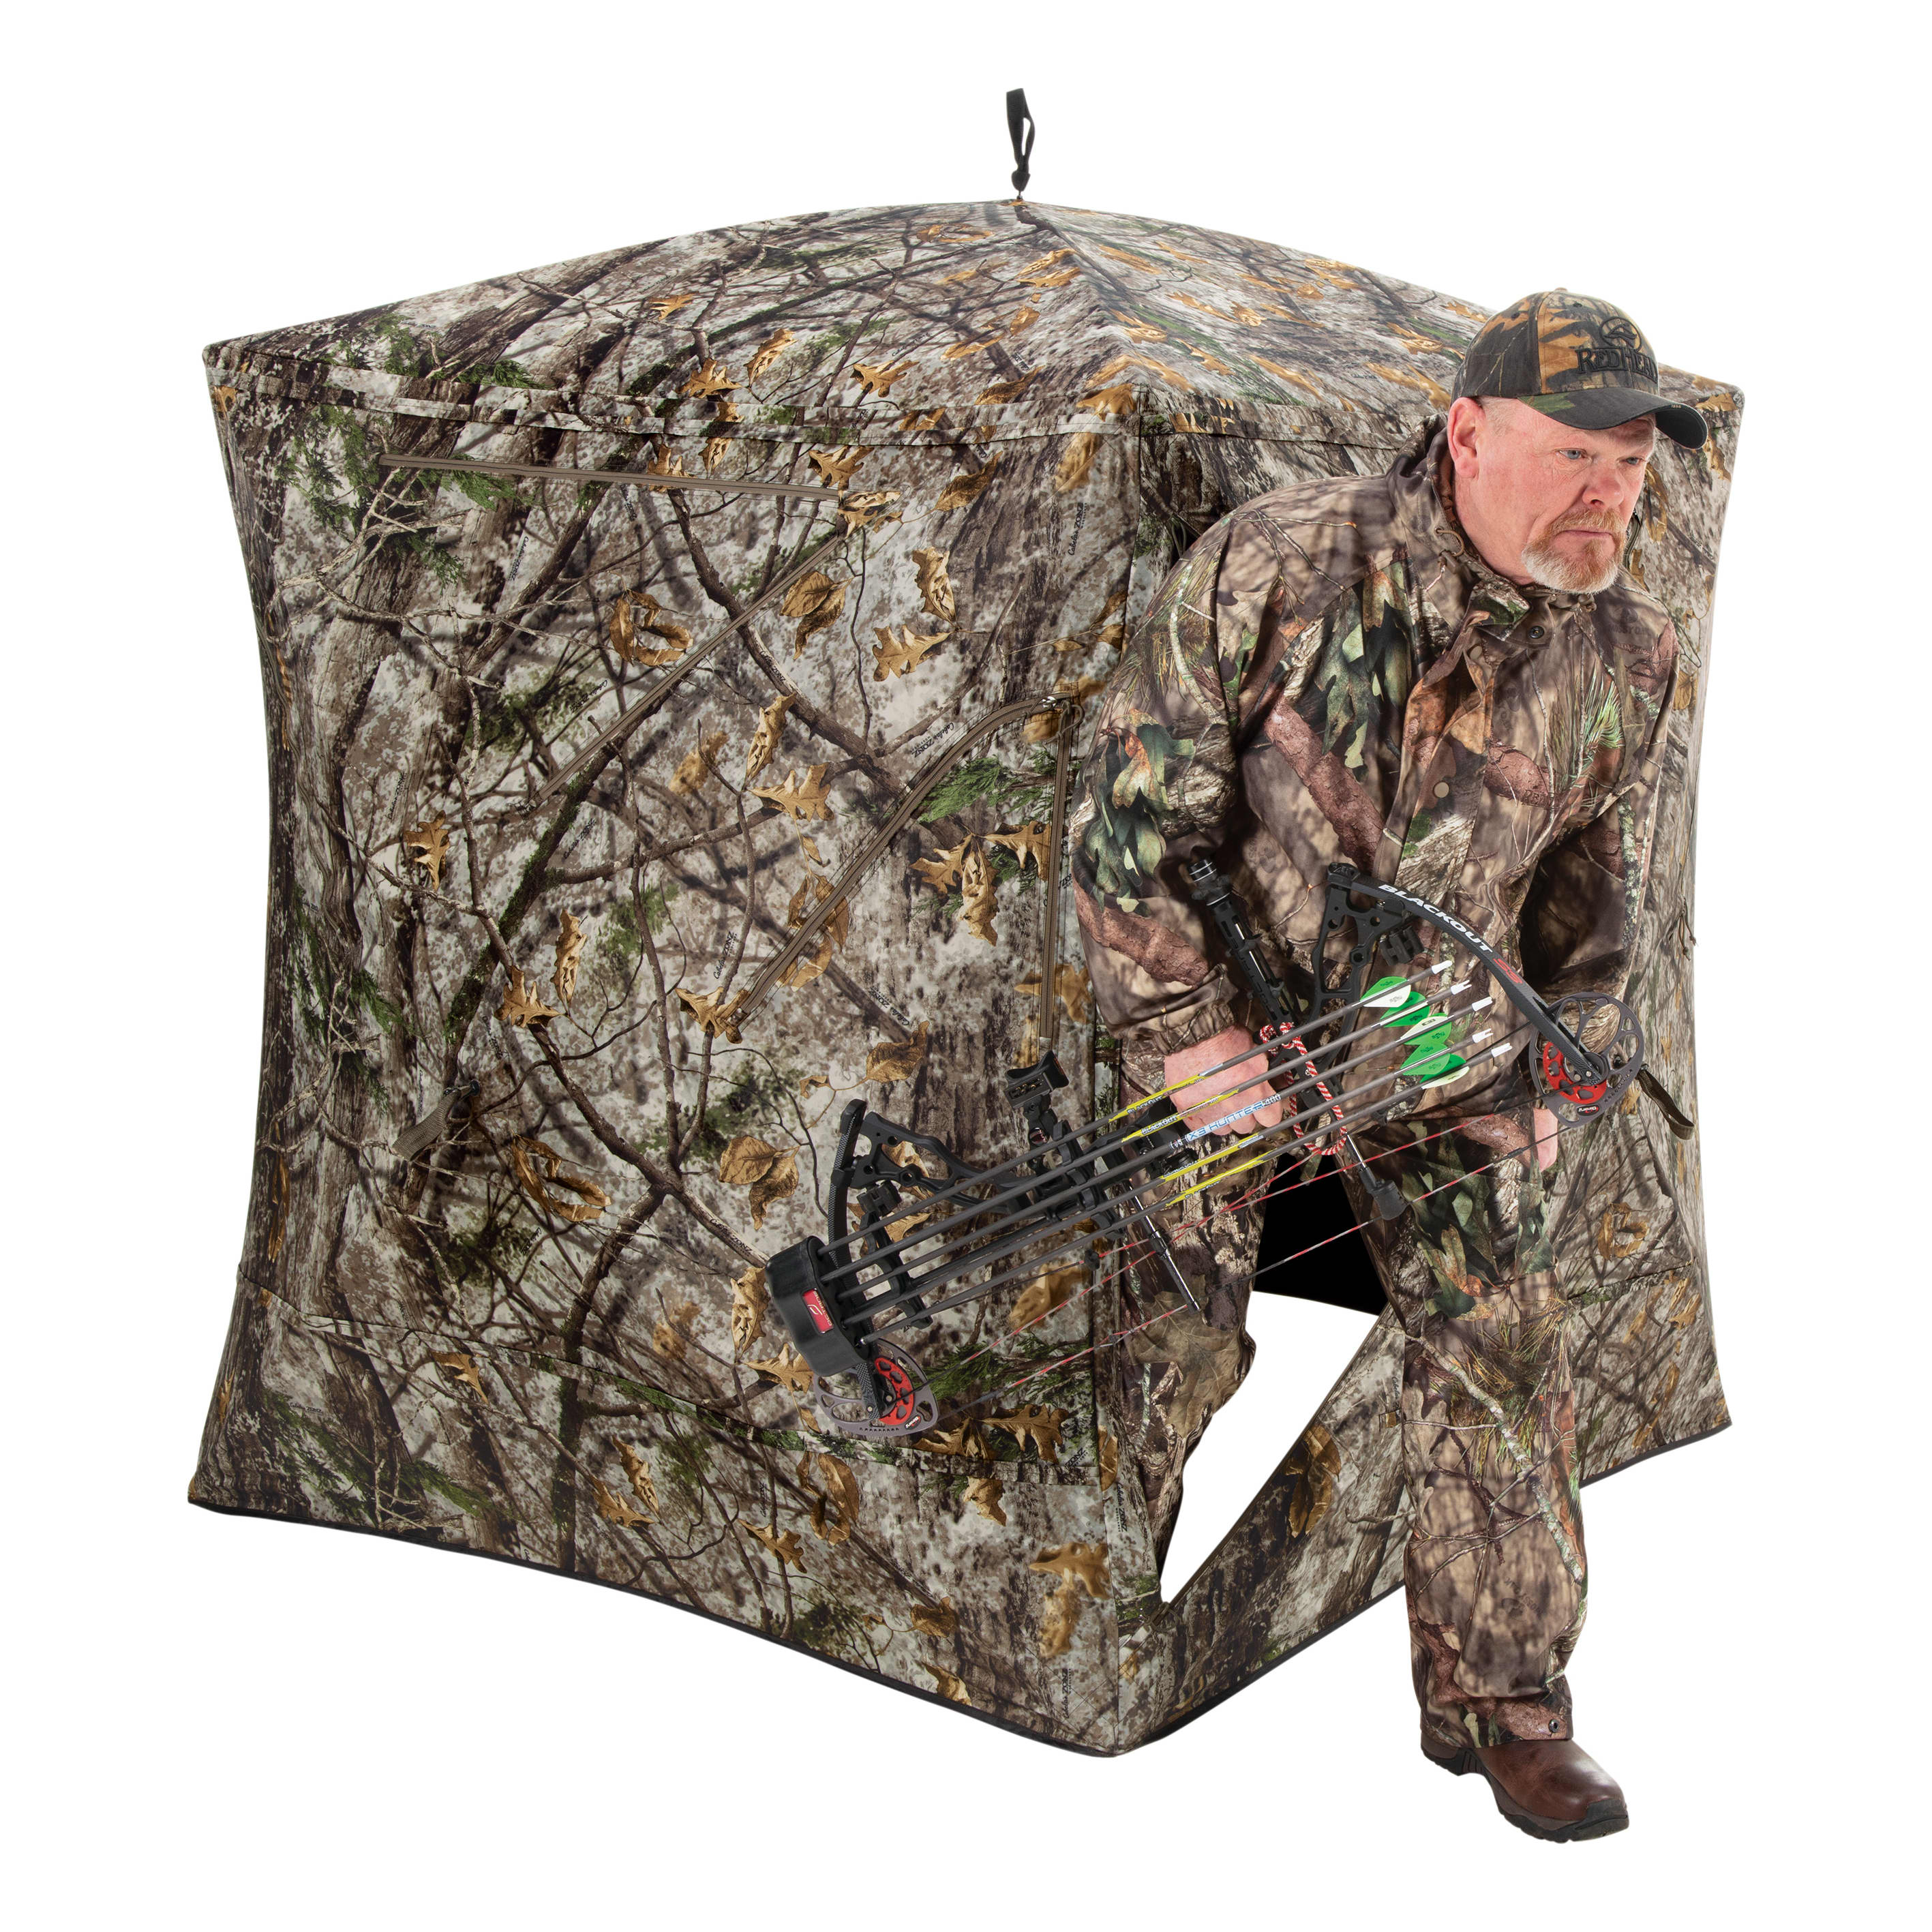 Pursuit Hub Ground Blind - In the Field